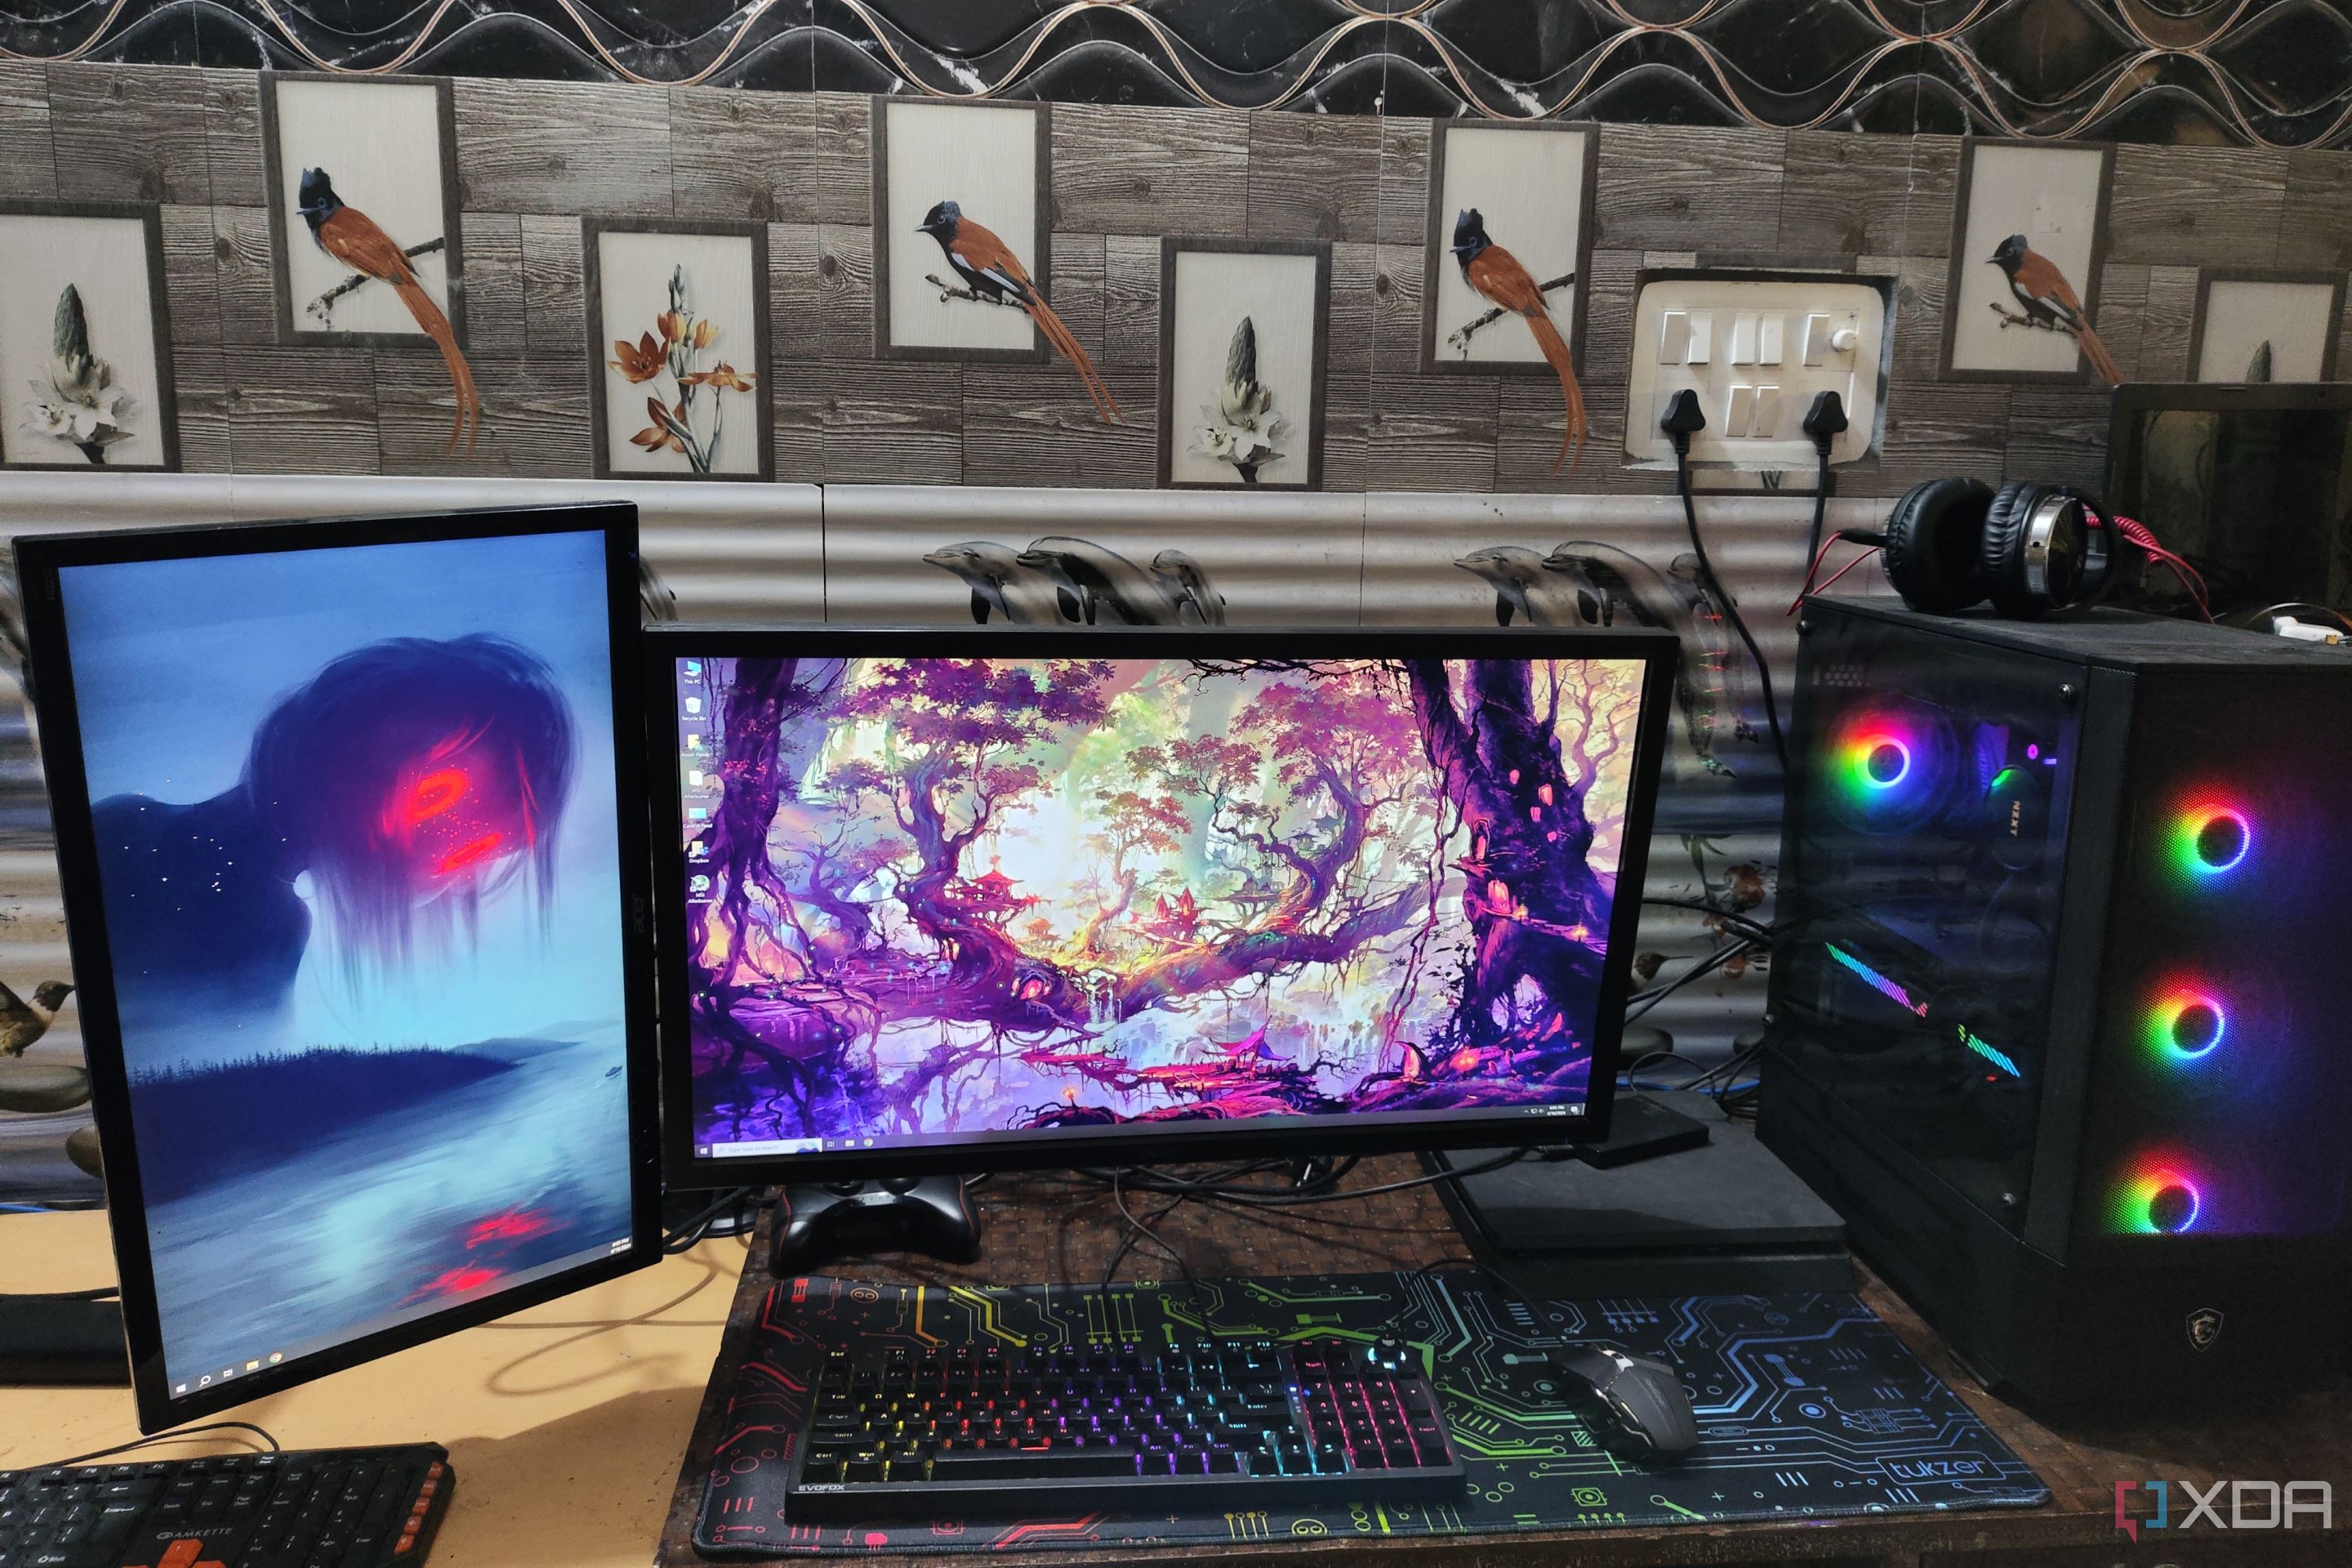 Two monitors placed side by side, with the one on the left running in portrait mode